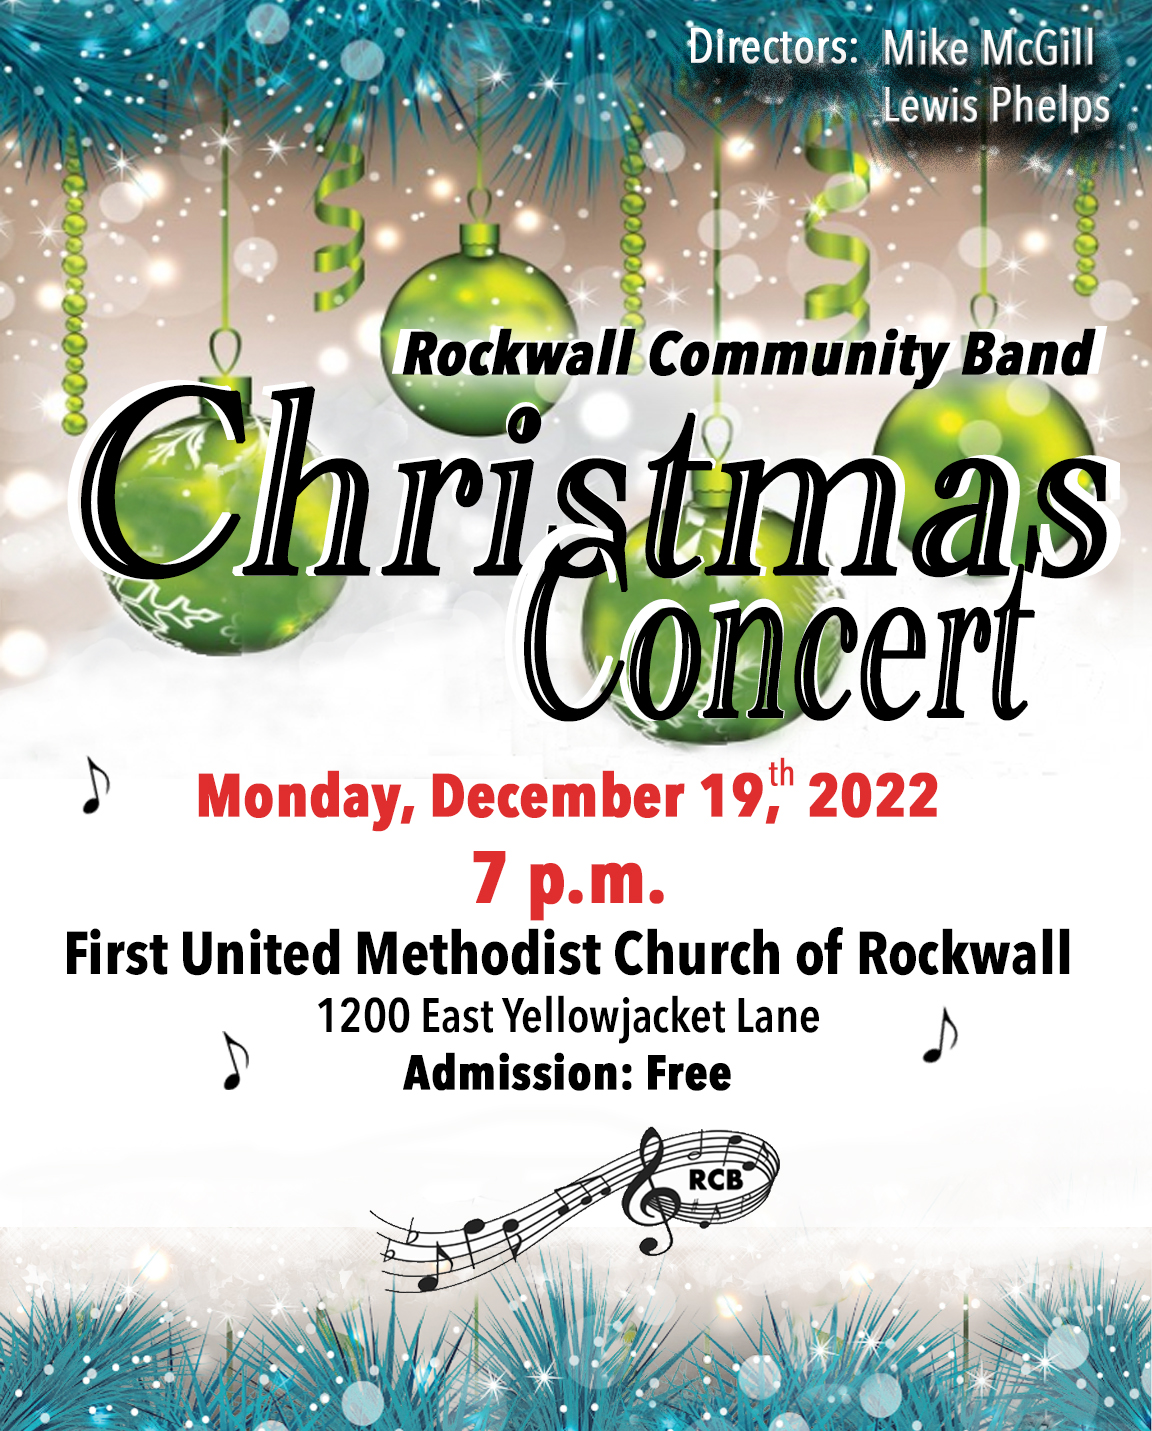 Rockwall Community Band to present free Christmas concert